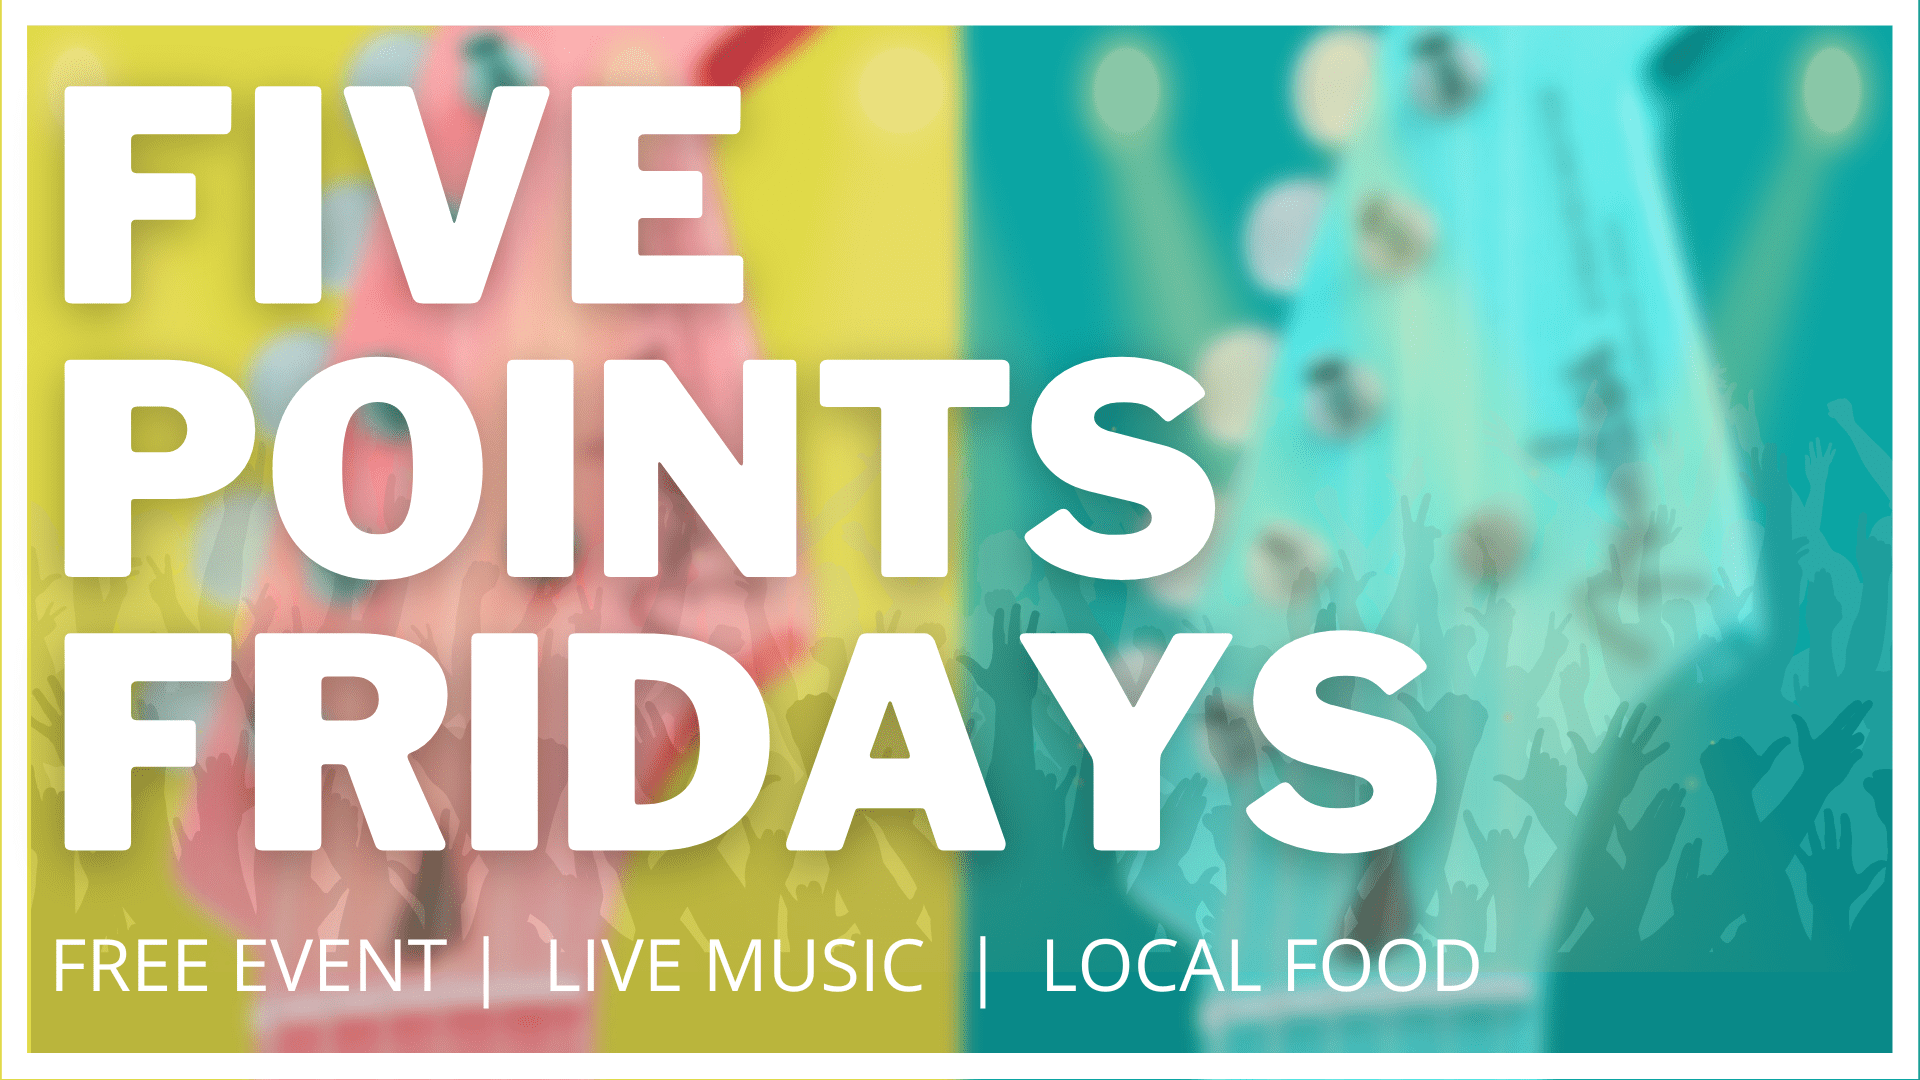 Five points Friday poster with yellow green color